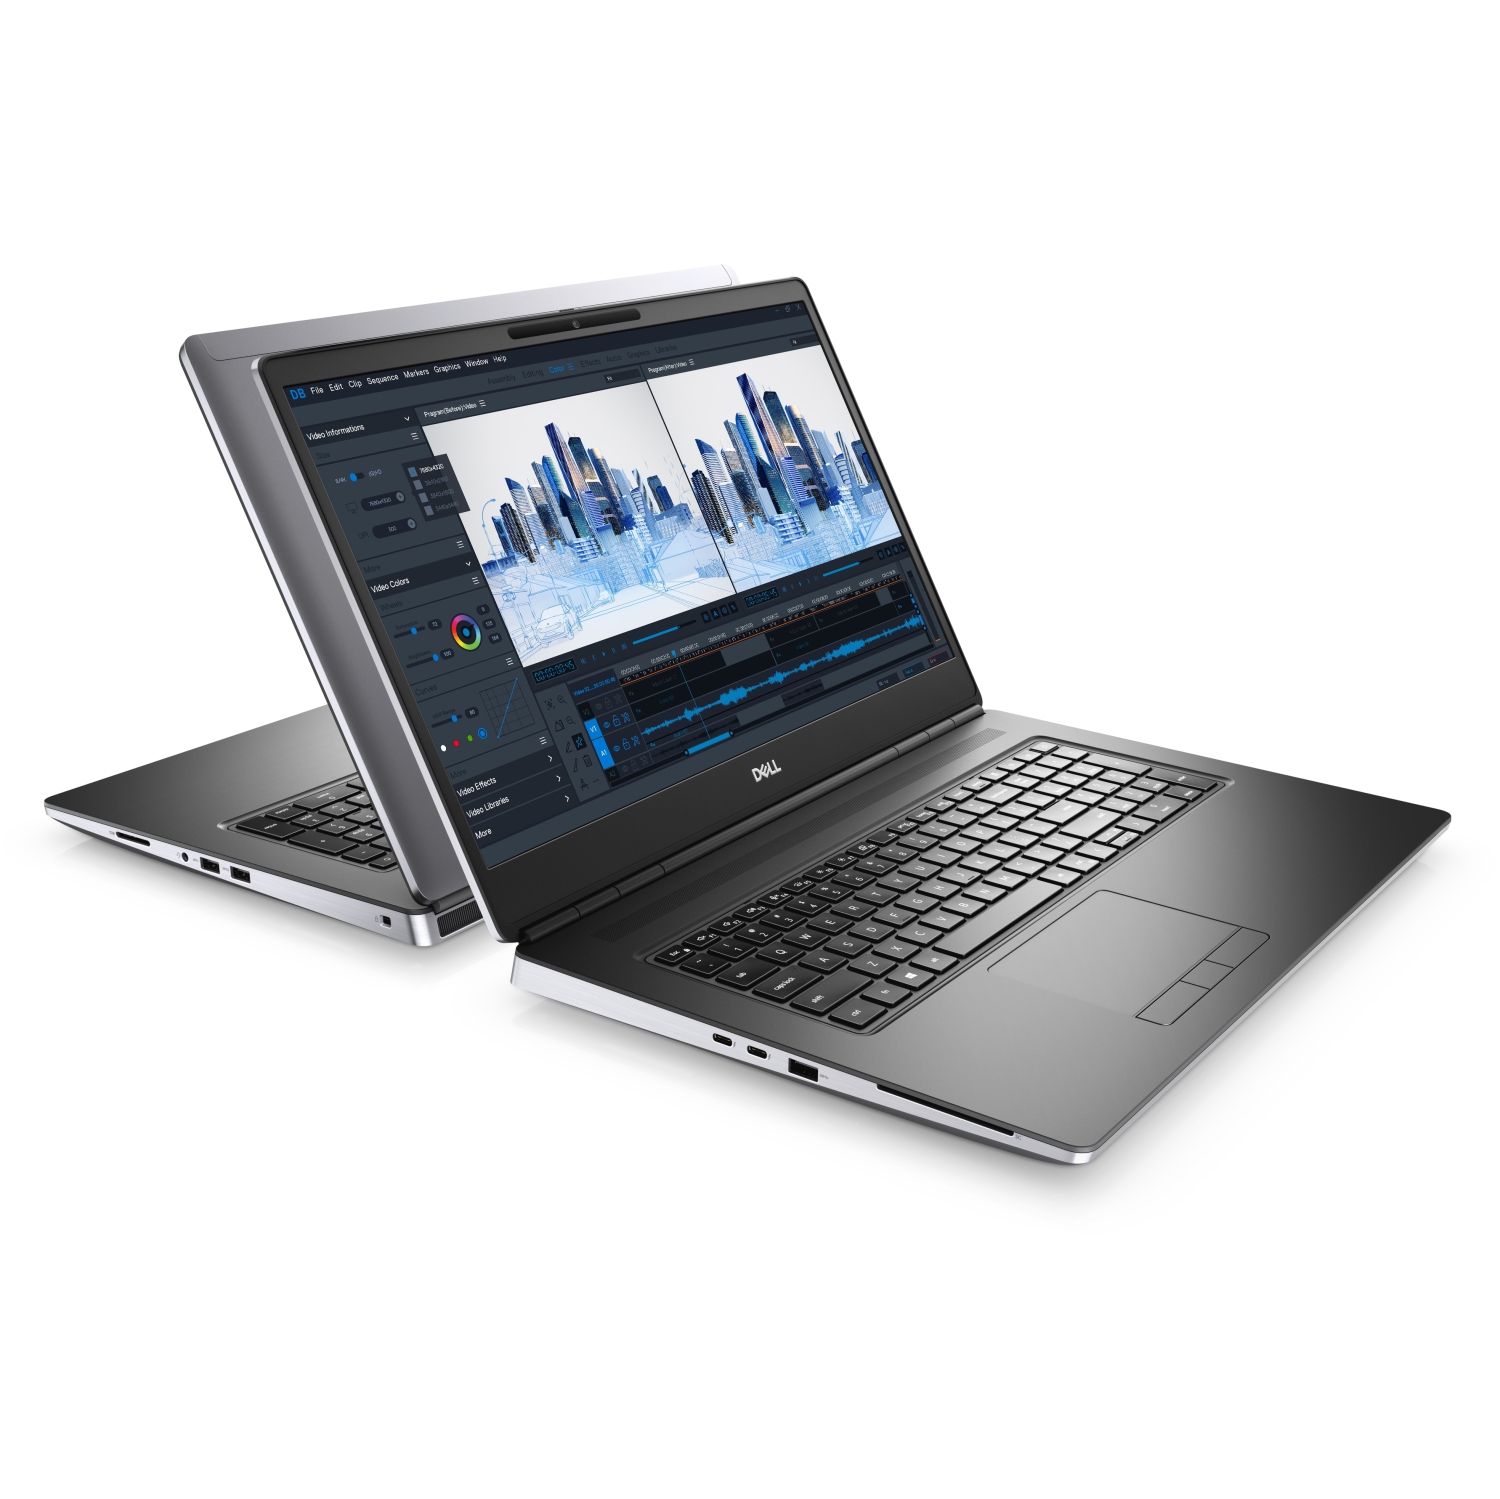 Refurbished (Excellent) - Dell Precision 7000 7760 Workstation Laptop (2021), 17.3" FHD, Core i9, 512GB SSD + 512GB SSD, 64GB RAM, RTX A4000, 5 GHz, 11th Gen CPU